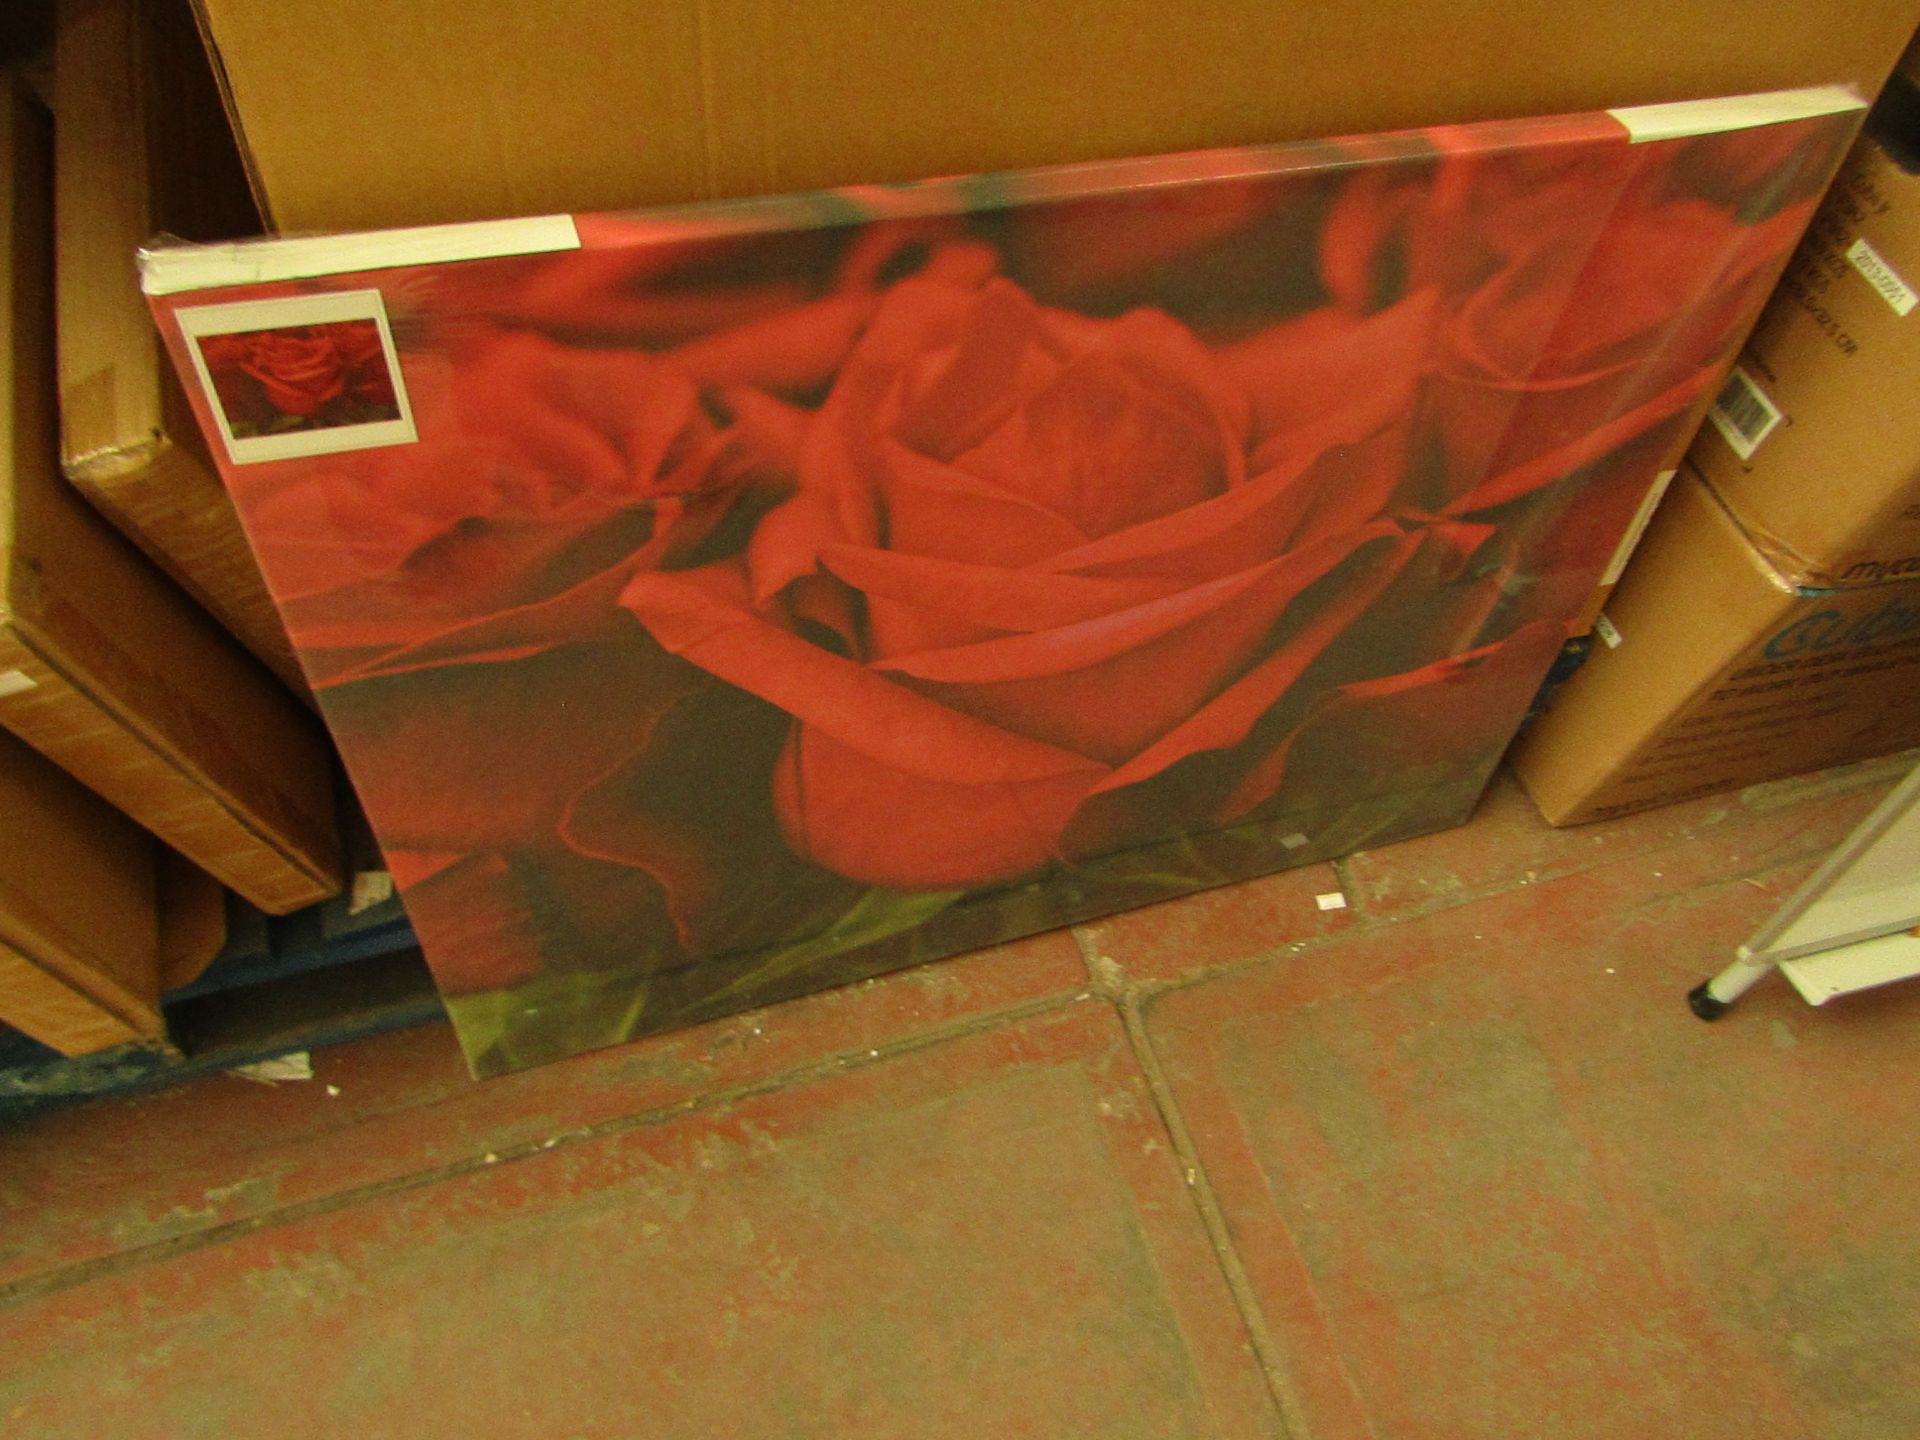 2x Red Roses Plant - Landscape Canvas (Length 80cmx Height 60cm) - New & Packaged.